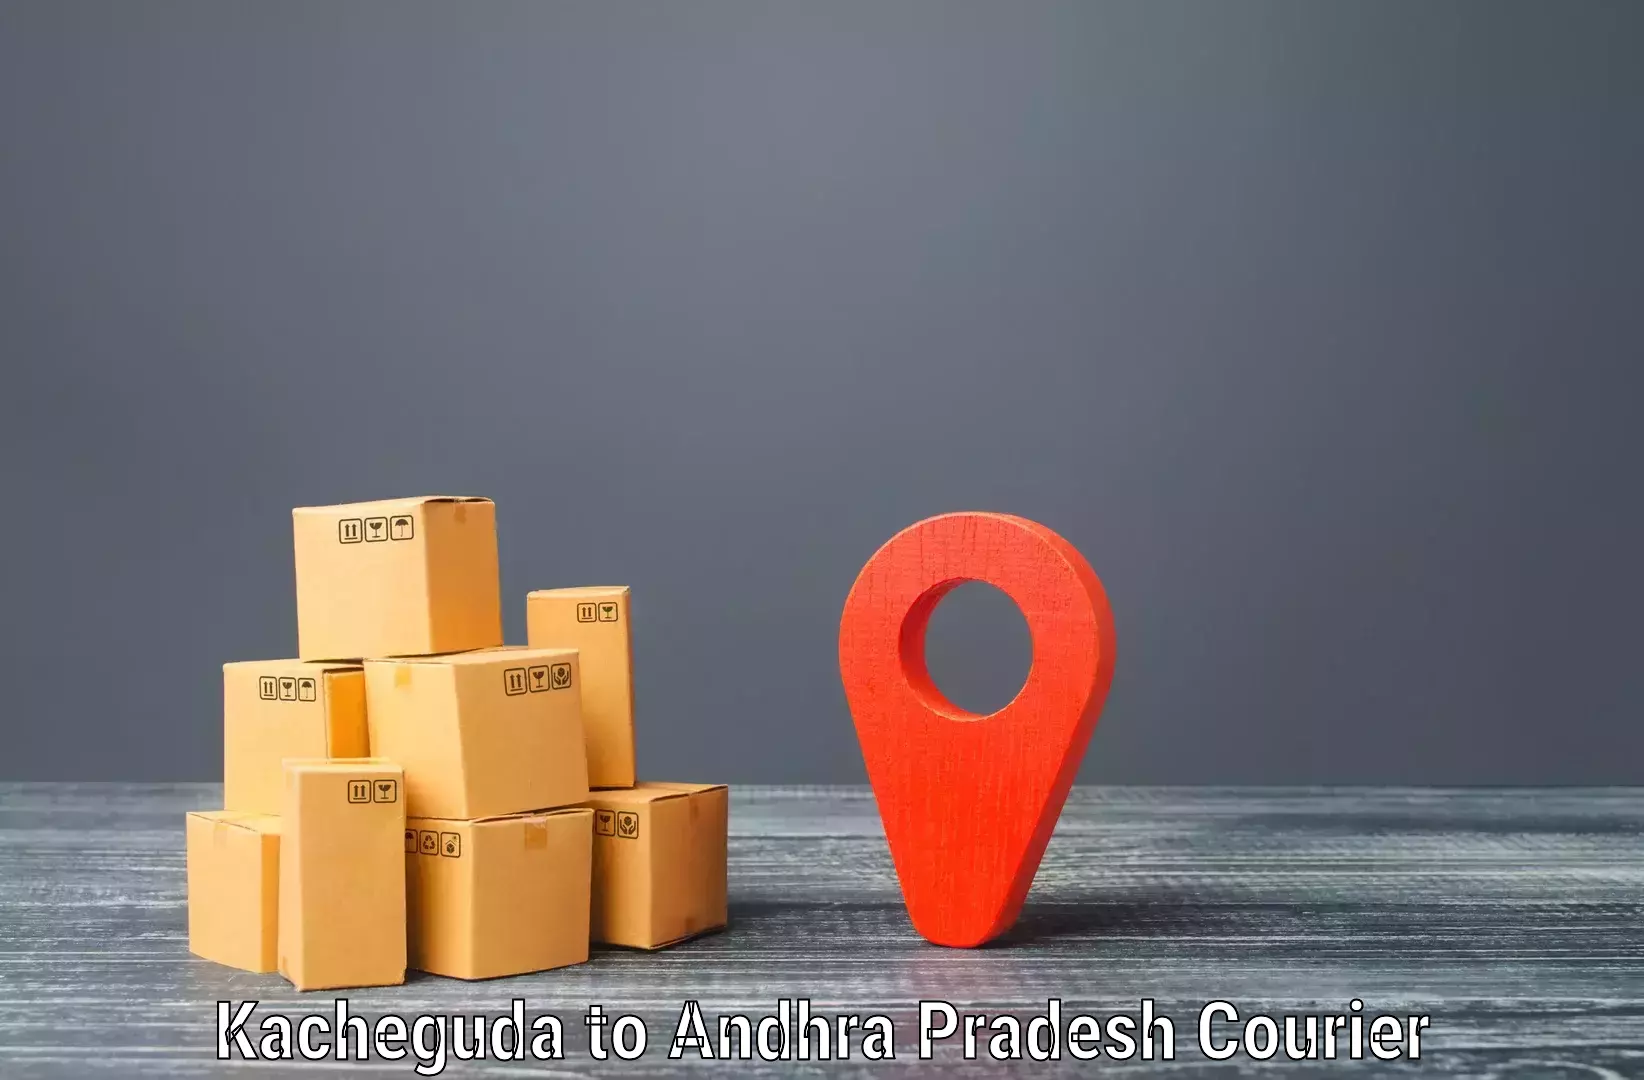 Same-day delivery solutions Kacheguda to Cuddapah